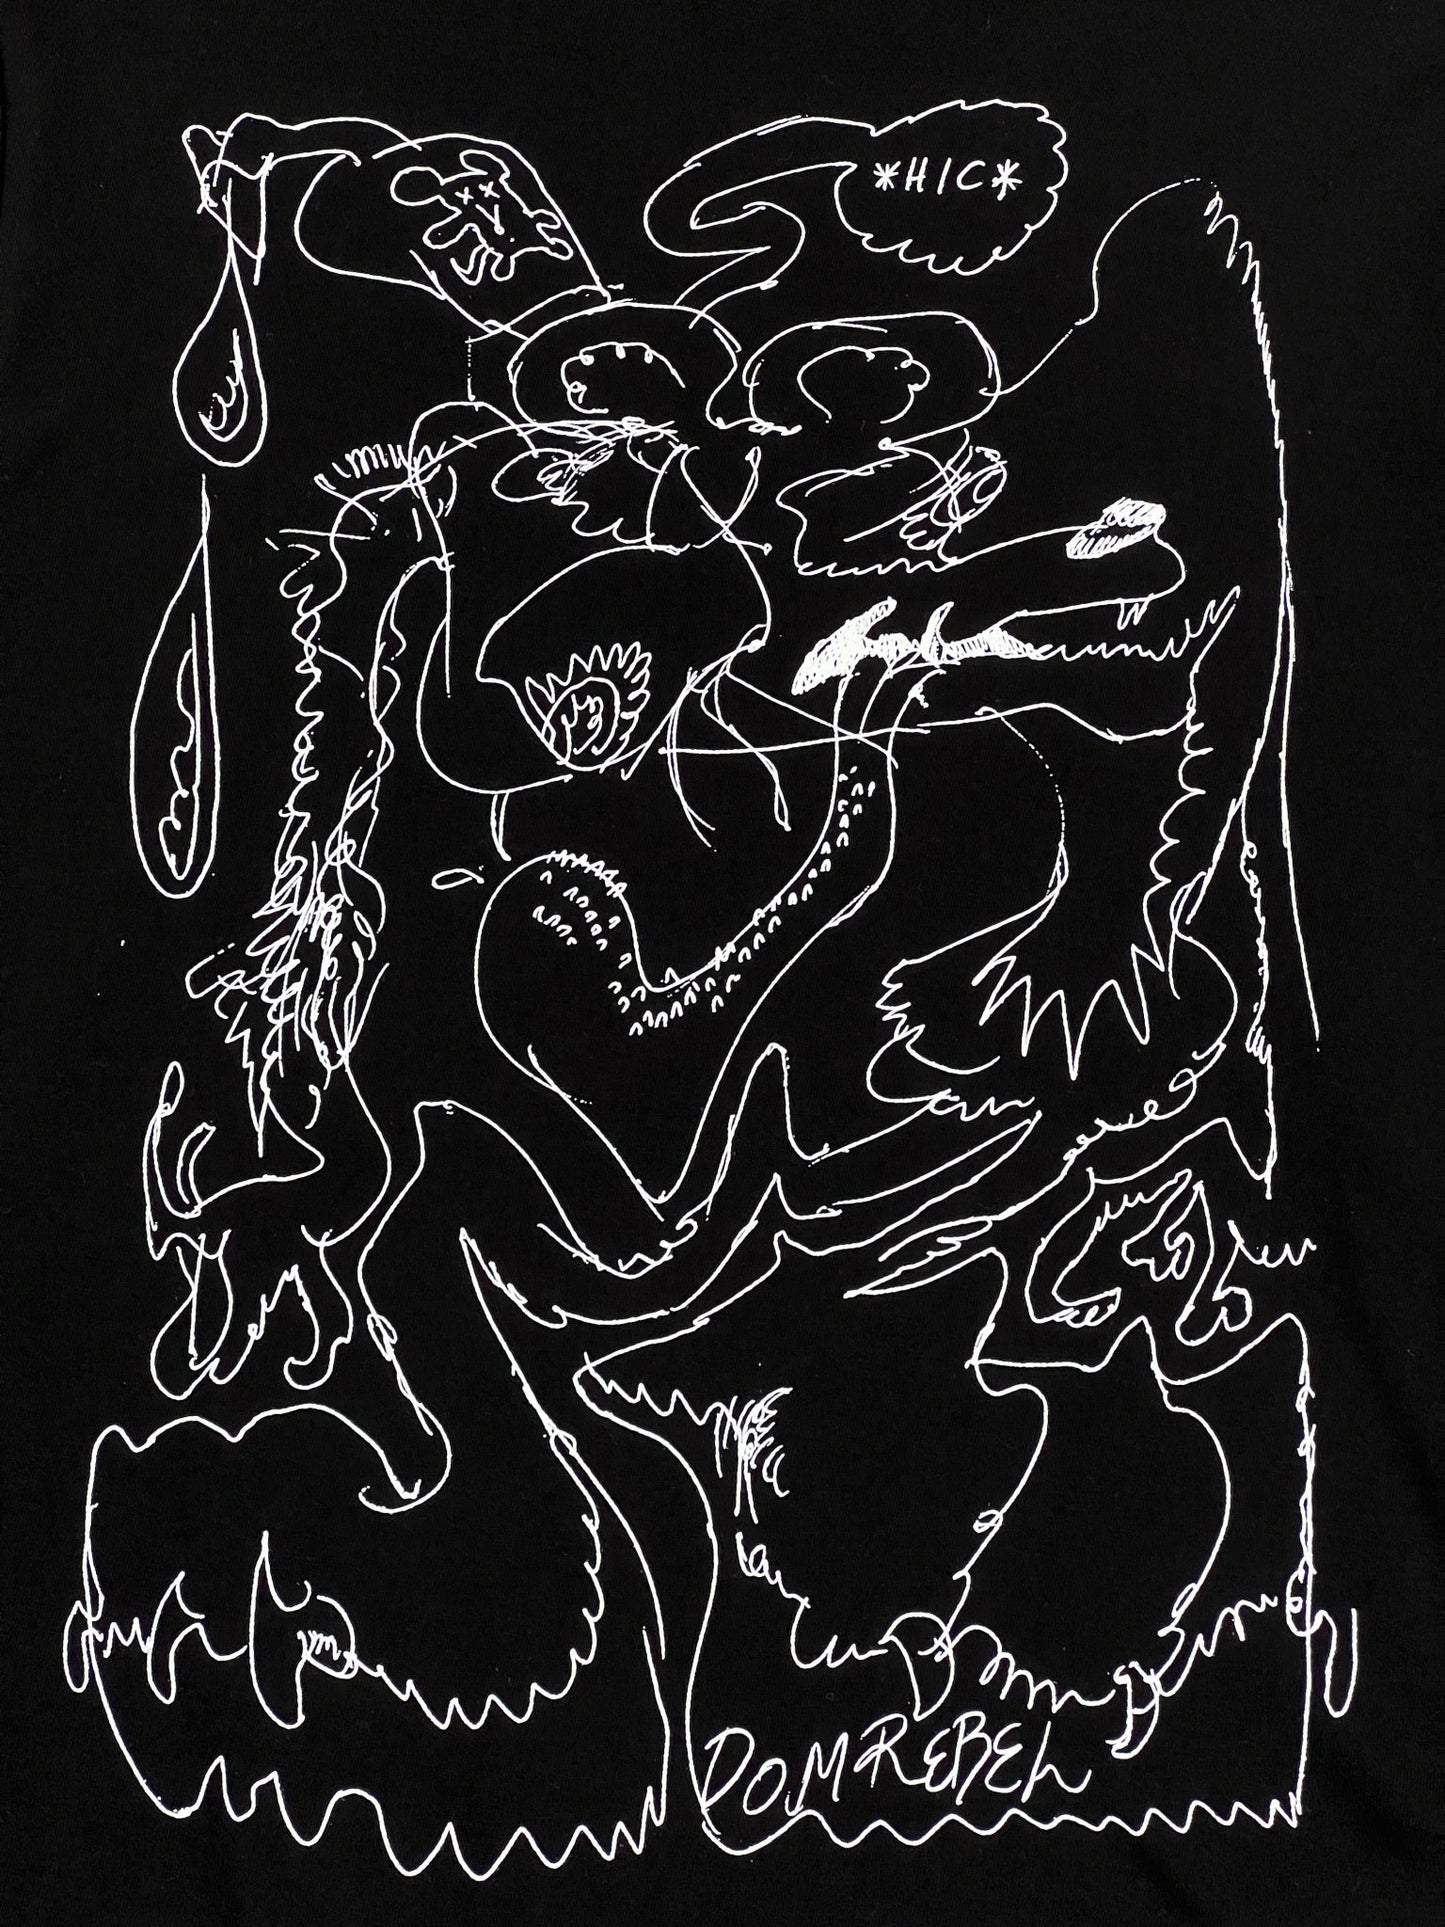 A black DOM REBEL long sleeve t-shirt with a drawing on it.